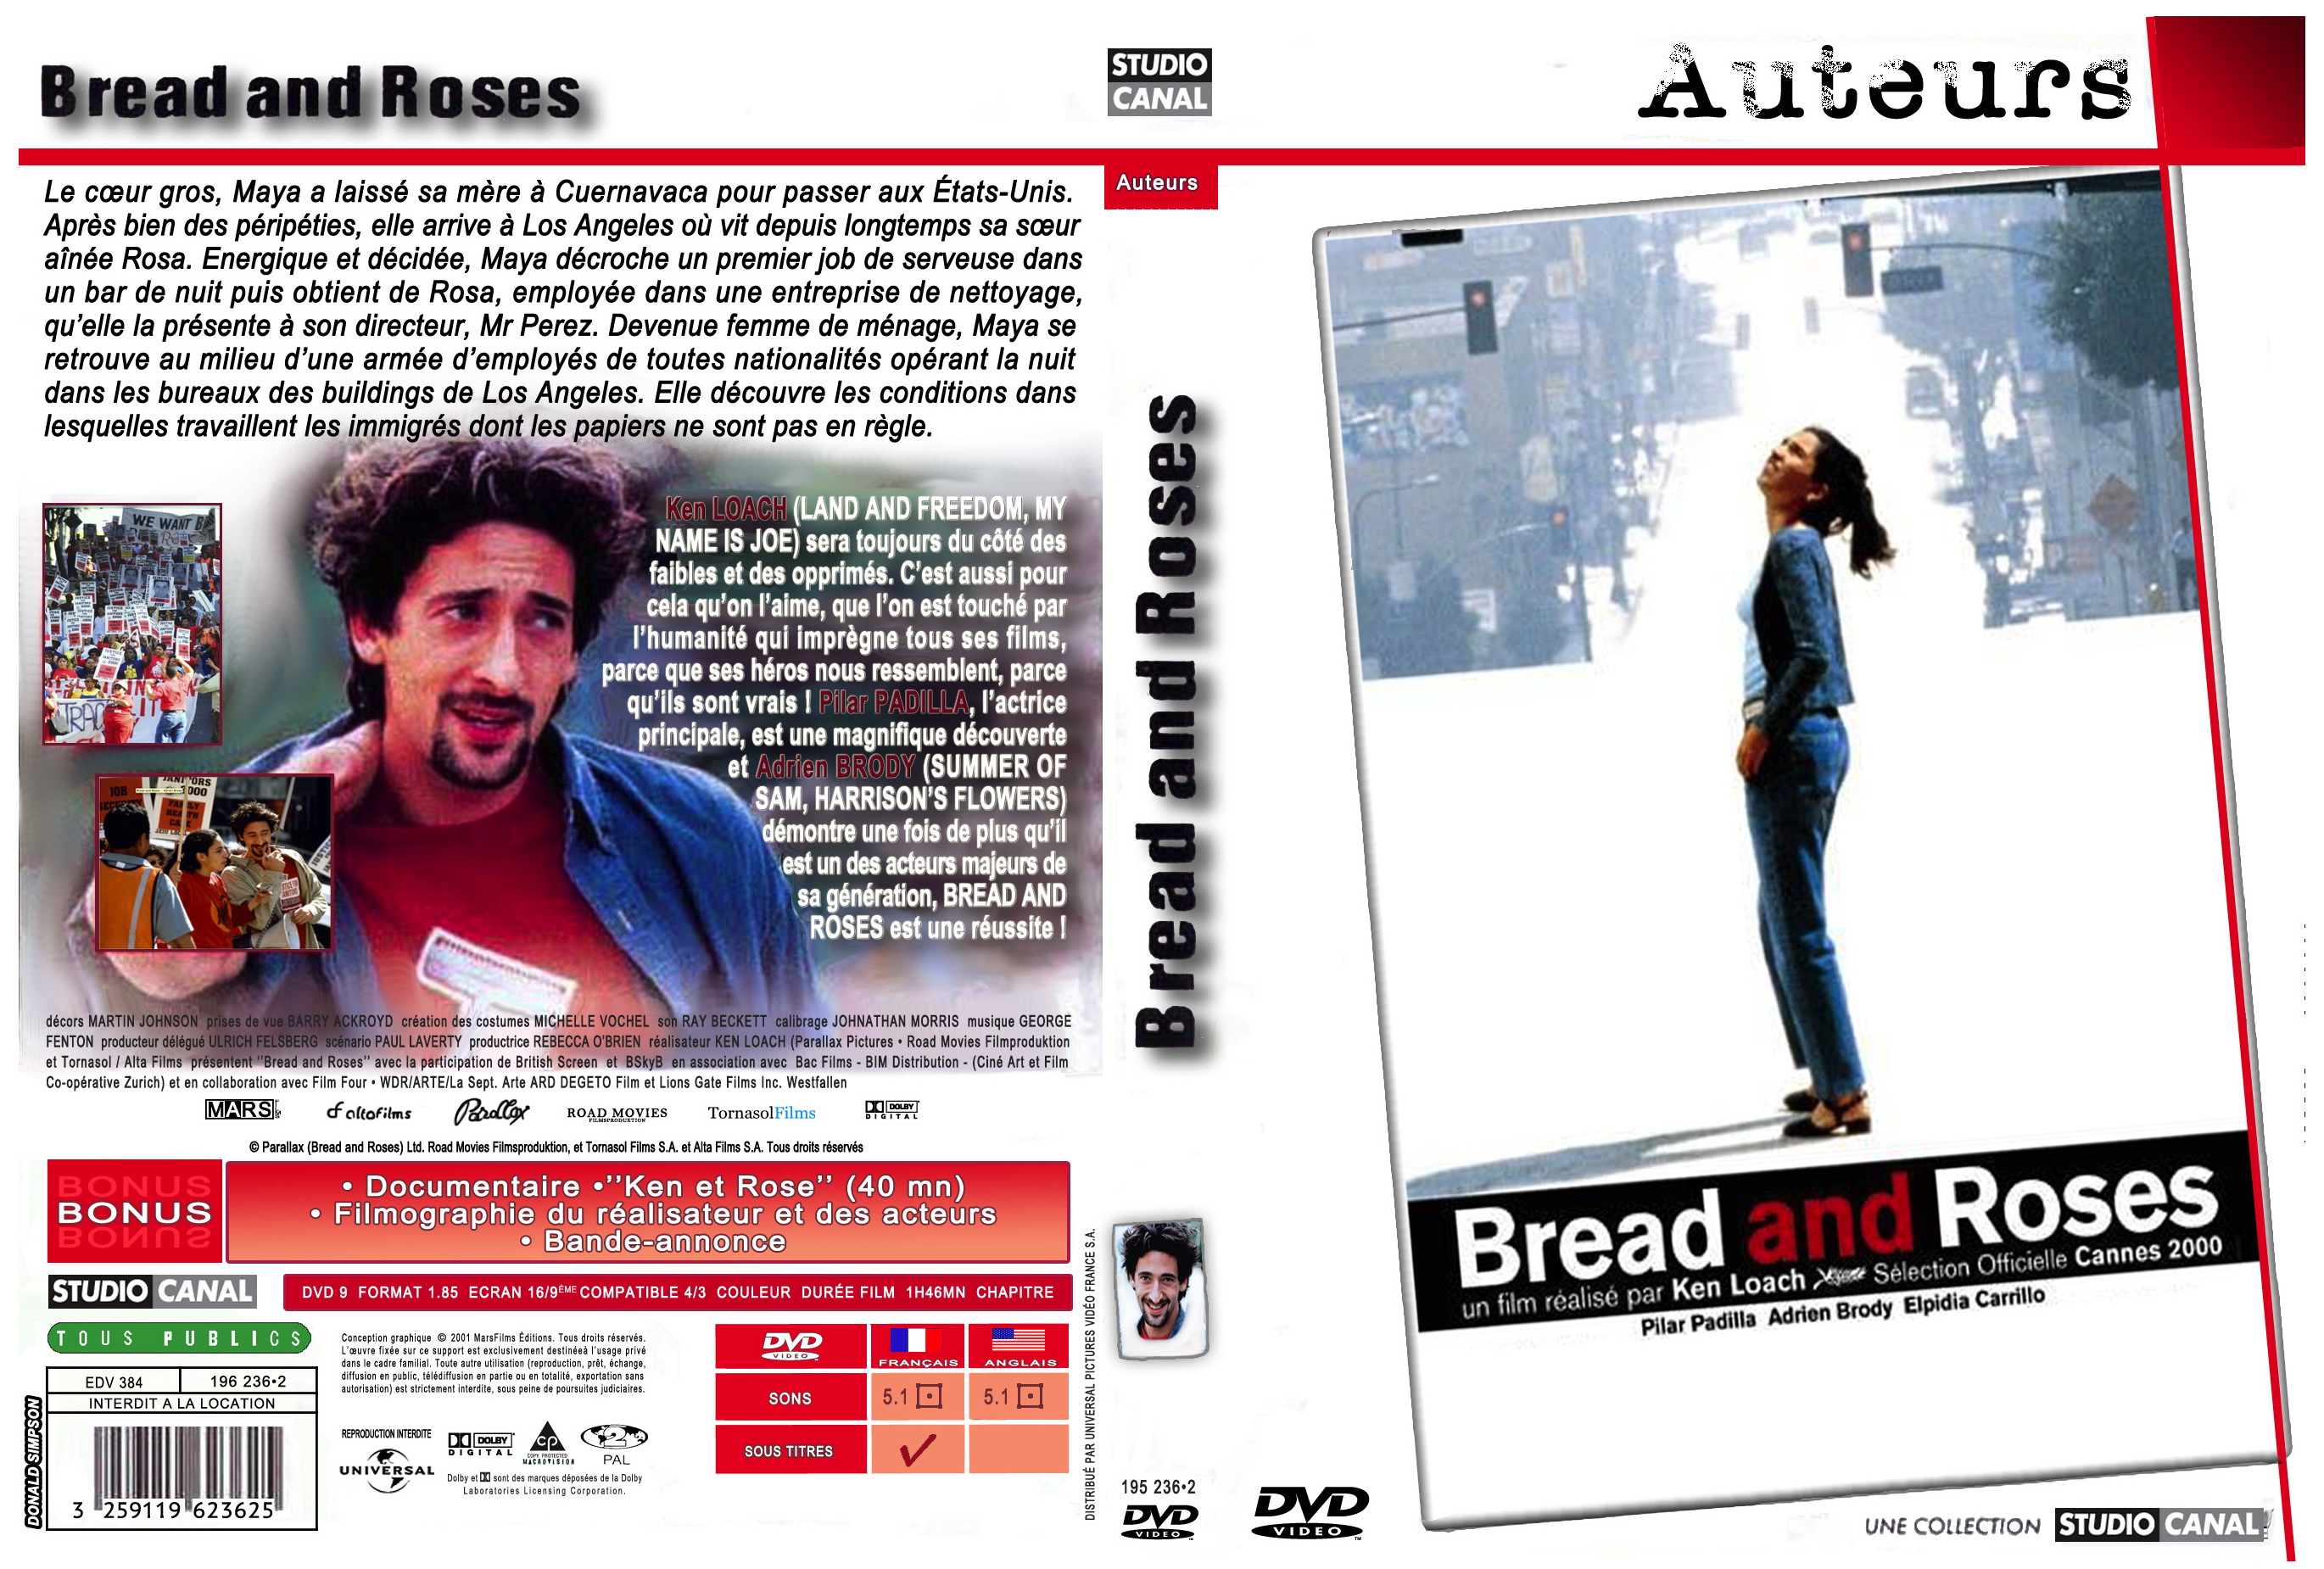 Jaquette DVD Bread and Roses custom